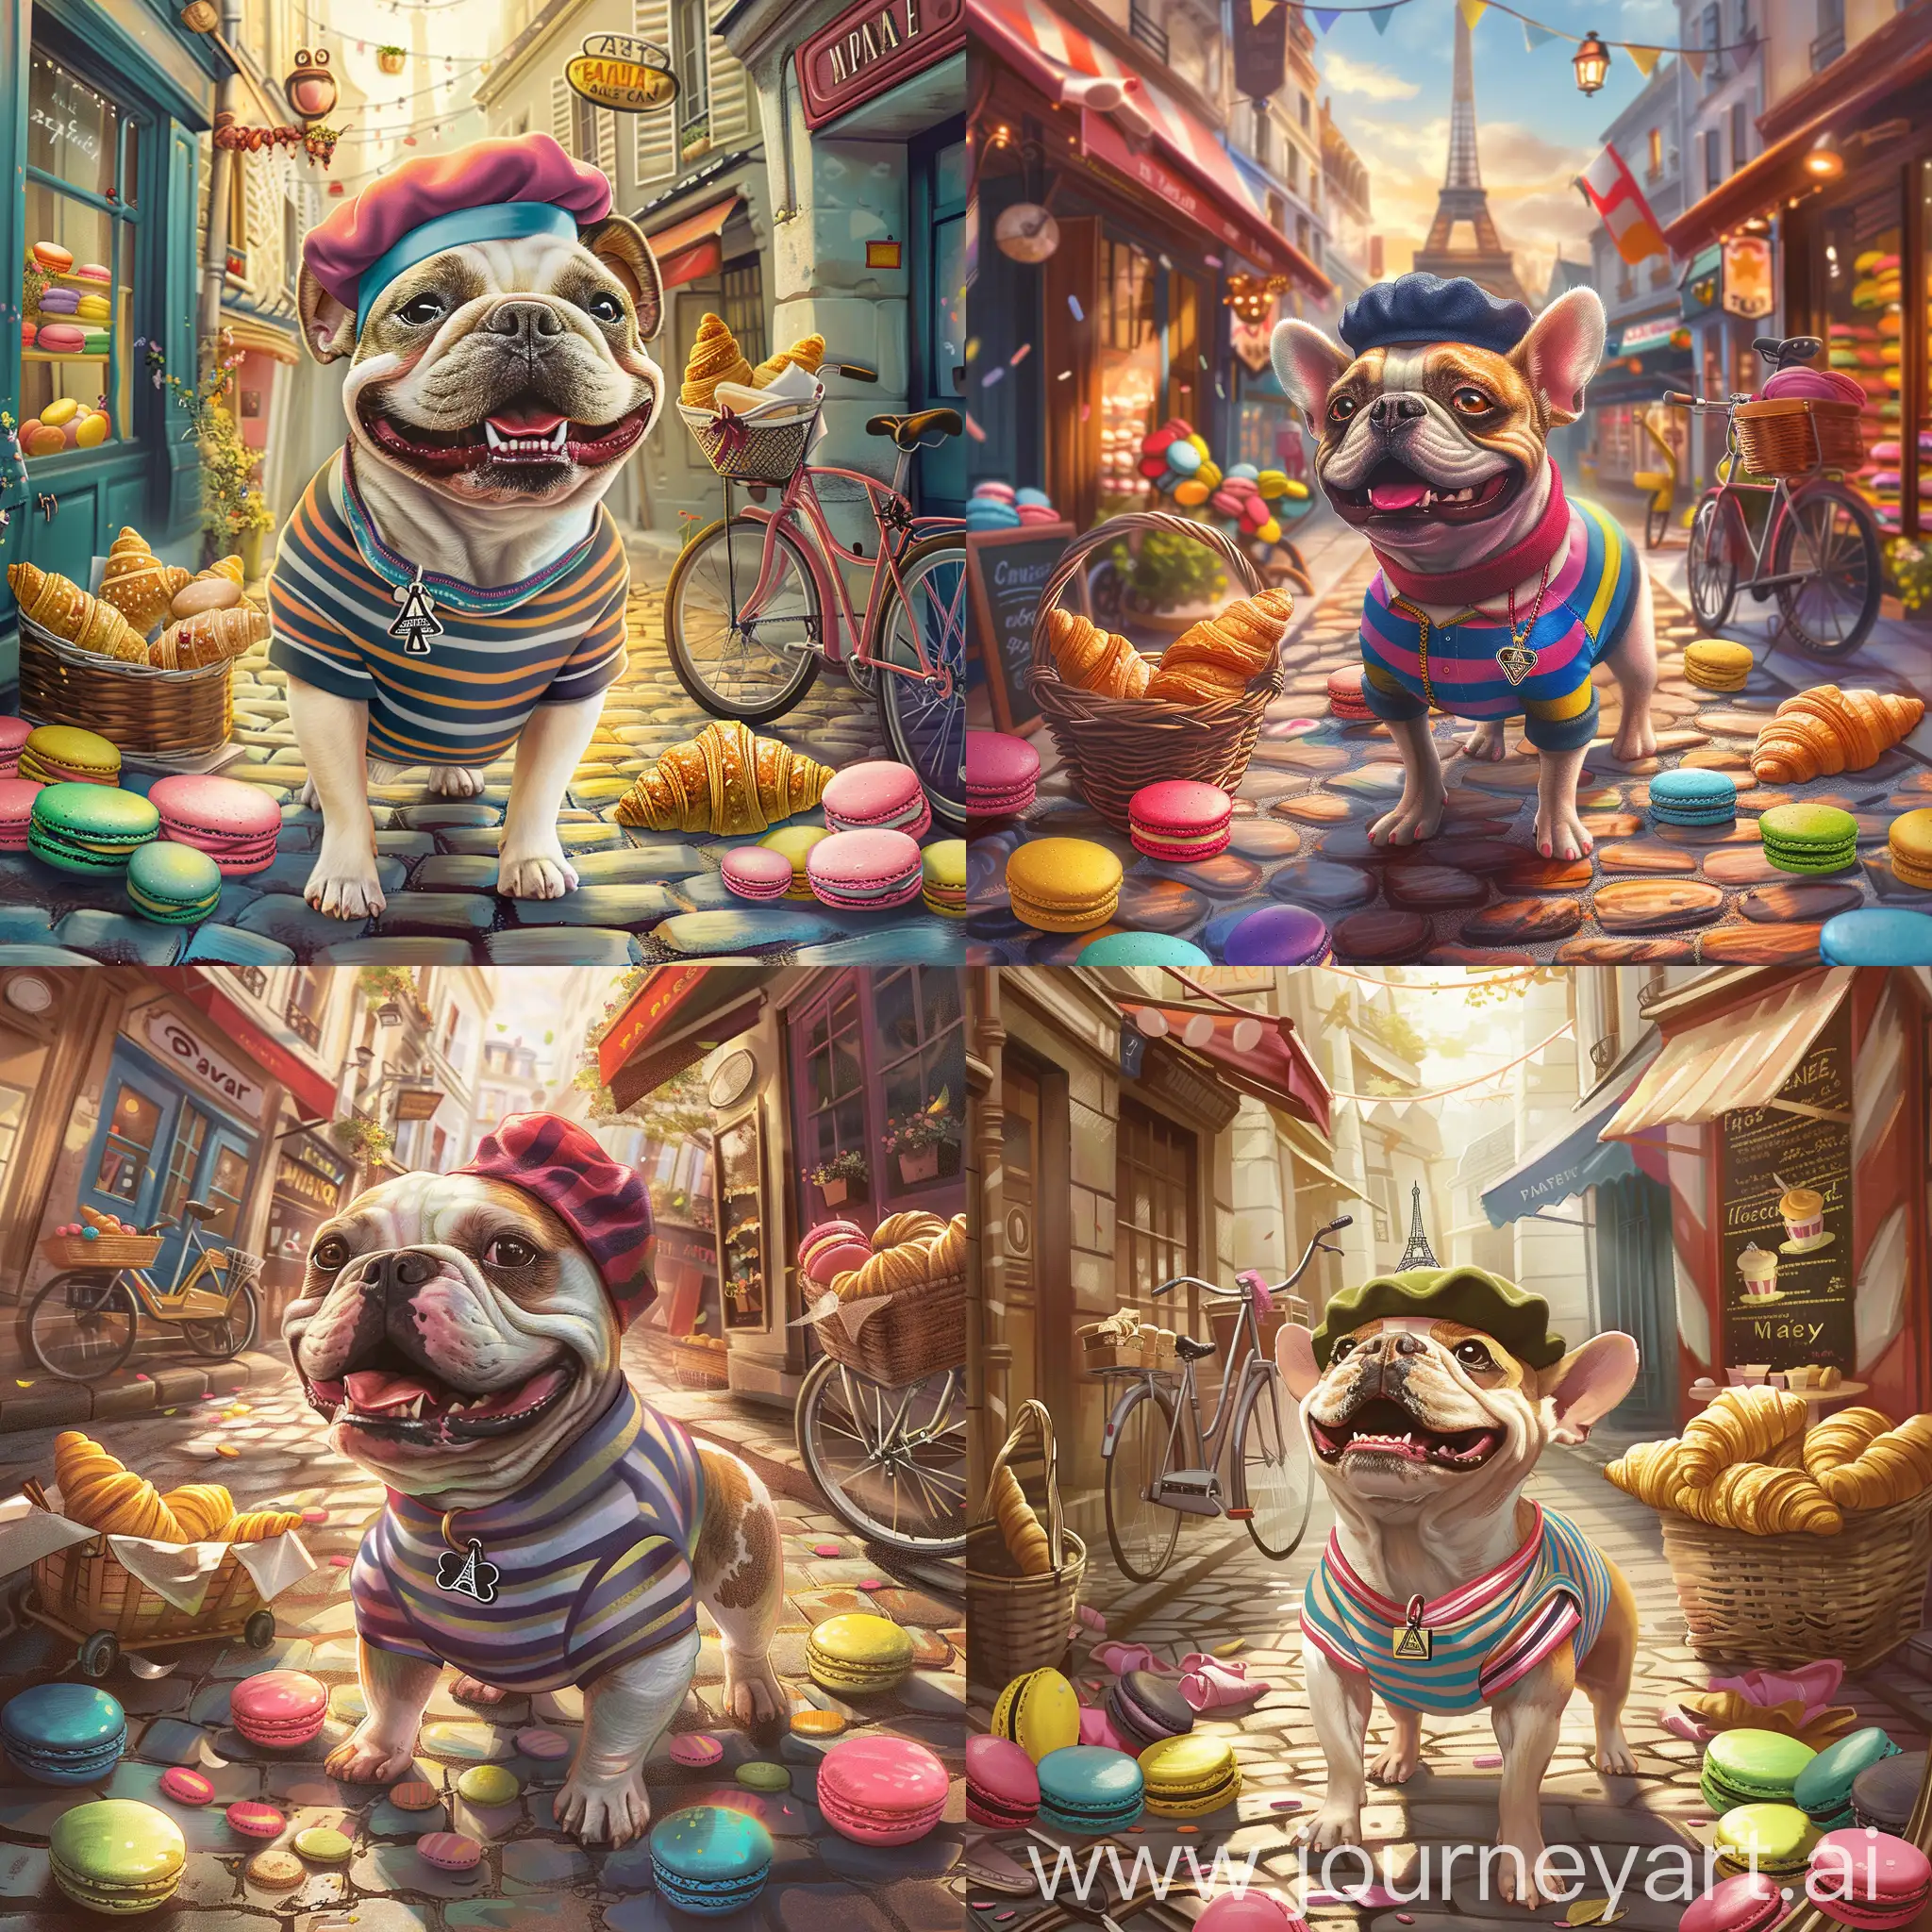 A whimsical, heartwarming digital painting of a French Bulldog wearing a beret and striped shirt, standing in a charming Parisian cobblestone street. Colorful macarons and fresh croissants surround the dog, who has an adorable, mischievous grin. Inspired by the works of Mary Blair and Pascal Campion, the scene captures the essence of French culture with pastel tones and soft lighting. The illustration includes playful details like a tiny Eiffel Tower charm on the dog's collar and a bicycle with a baguette in the basket in the background.